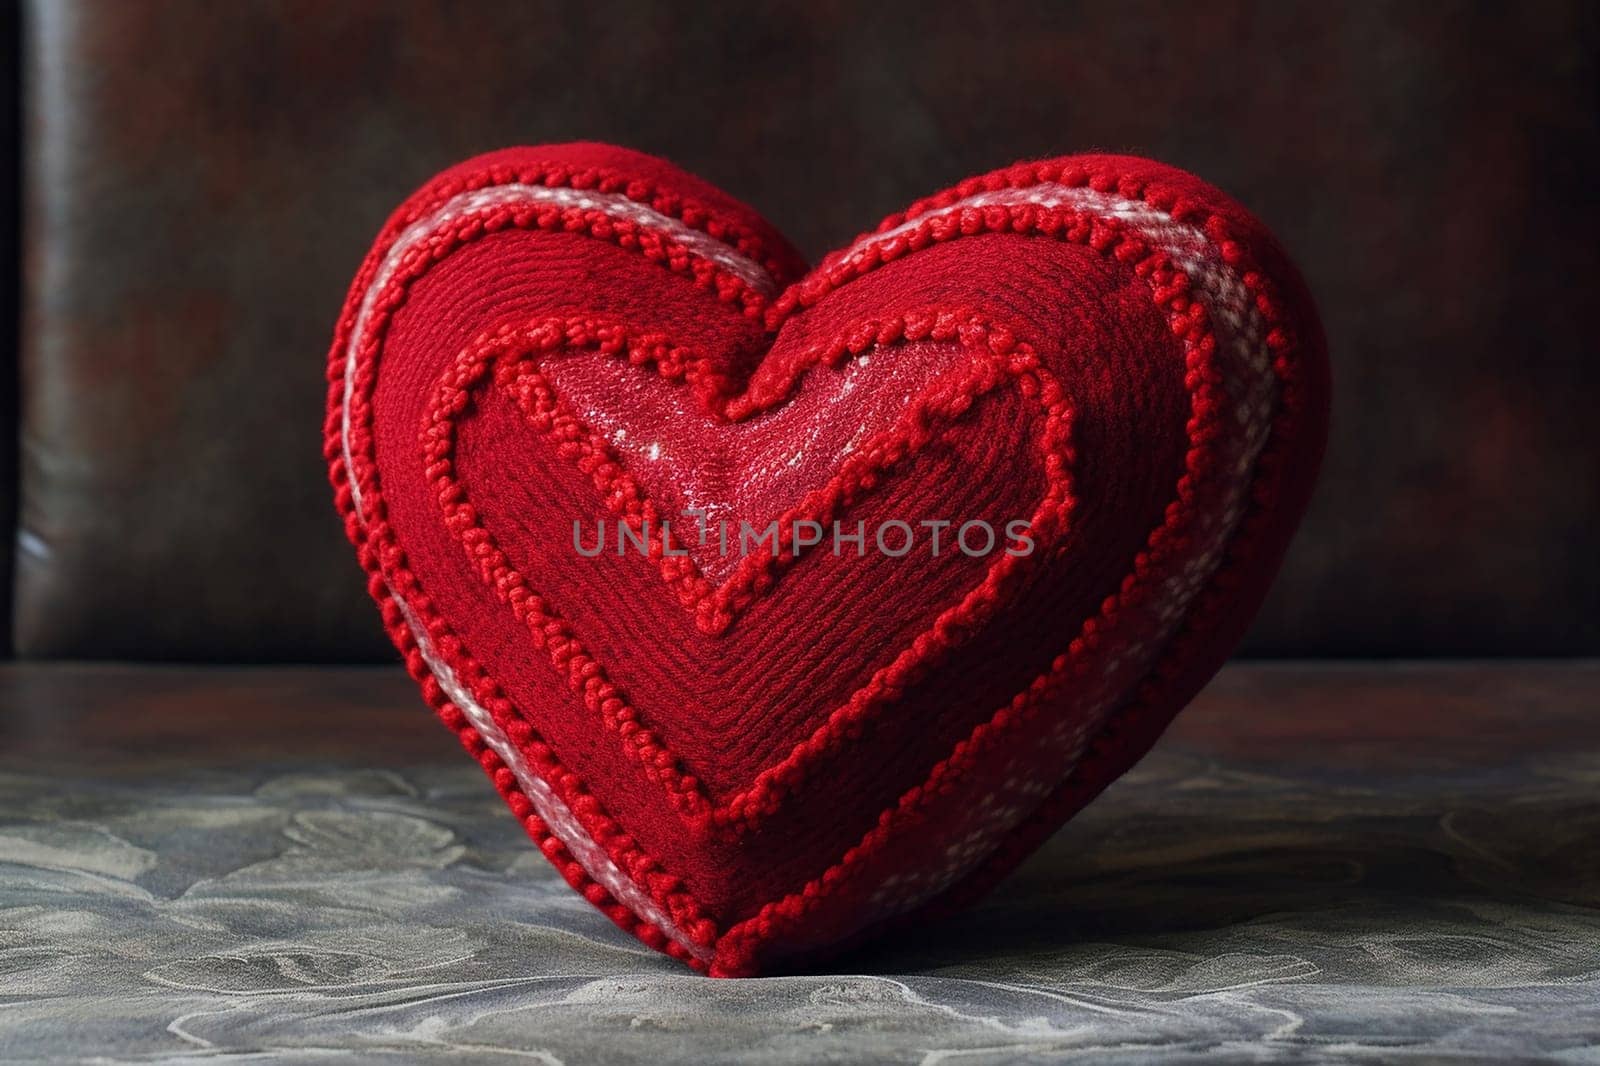 A knitted red heart-shaped cushion on a dark textured background. by Hype2art